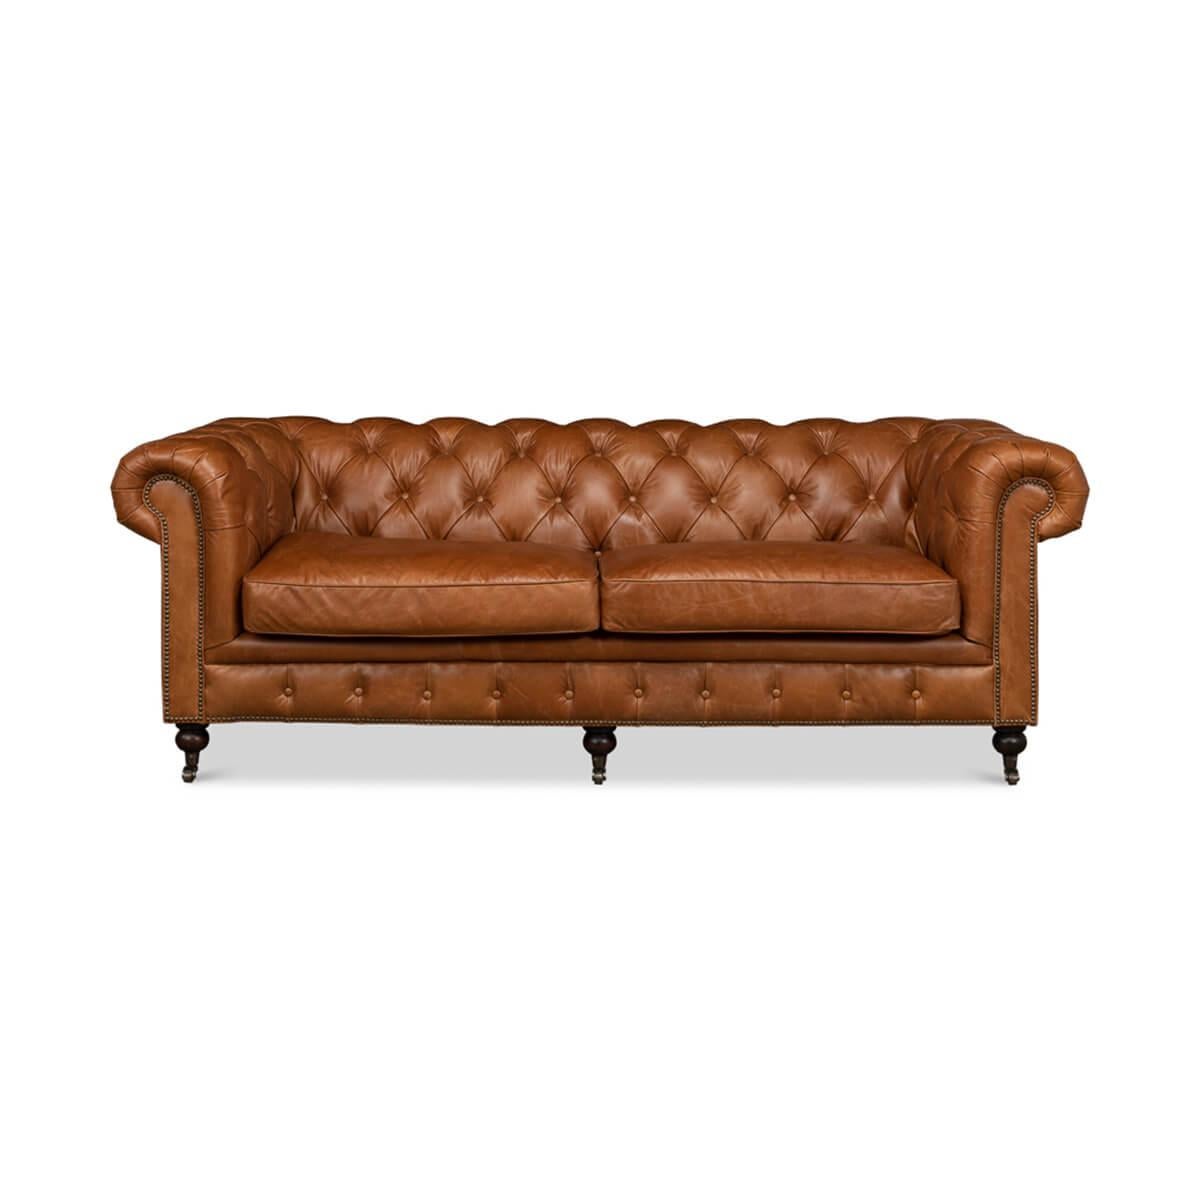 A vintage style classic Chesterfield sofa in Vienna brown leather. This traditional English- style sofa features a button-tufted interior, roll-over arms, nailhead trim accents and turned legs with brass-capped casters. It is crafted with a hardwood